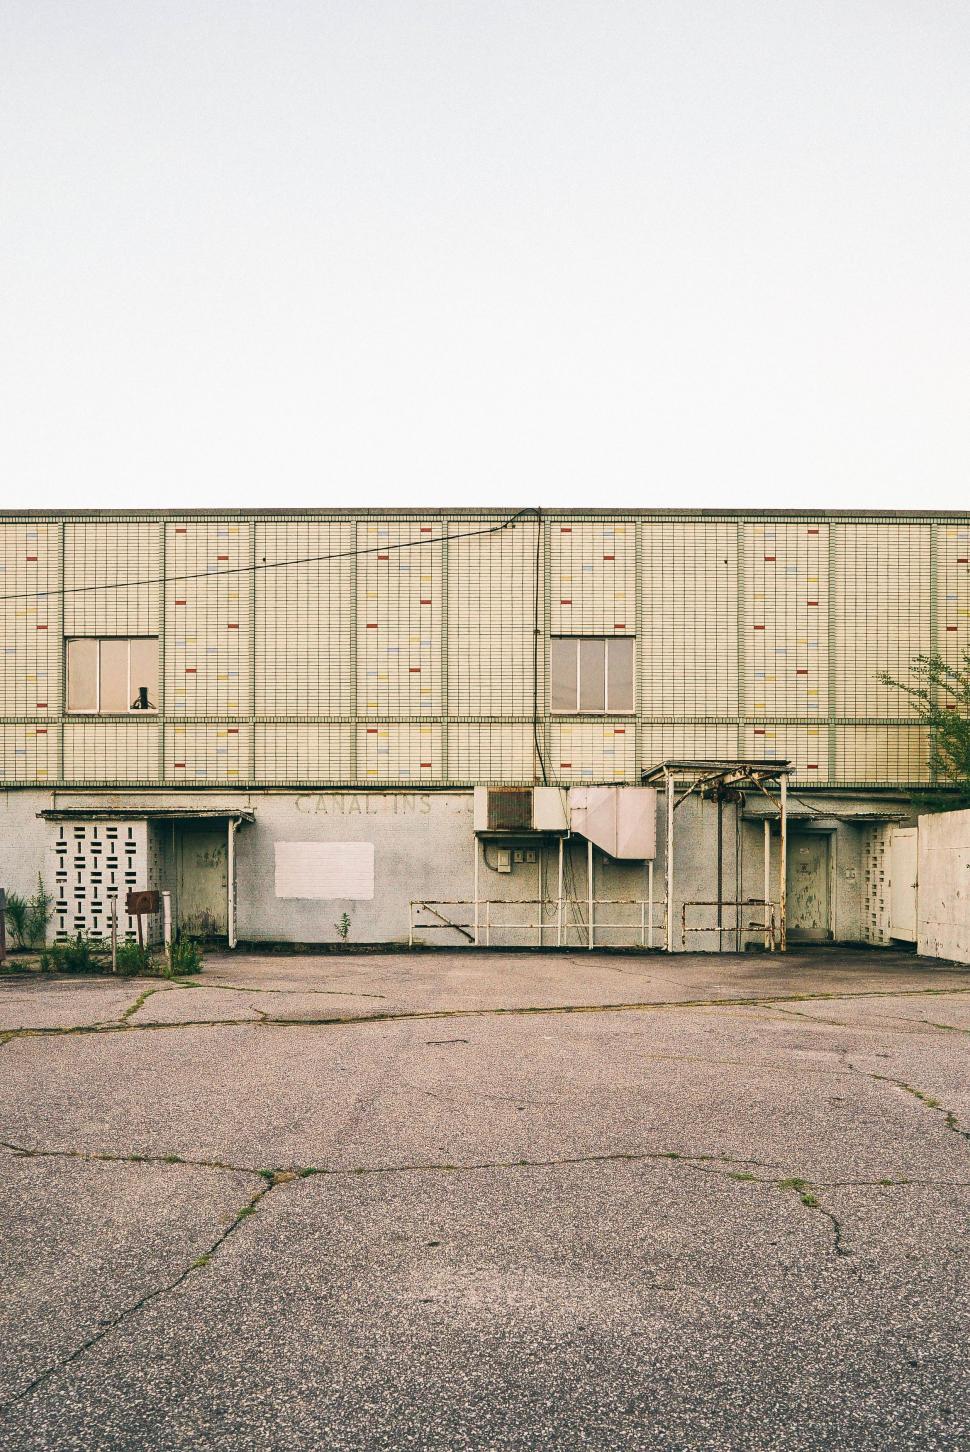 Free Image of Empty Parking Lot in Front of Building 